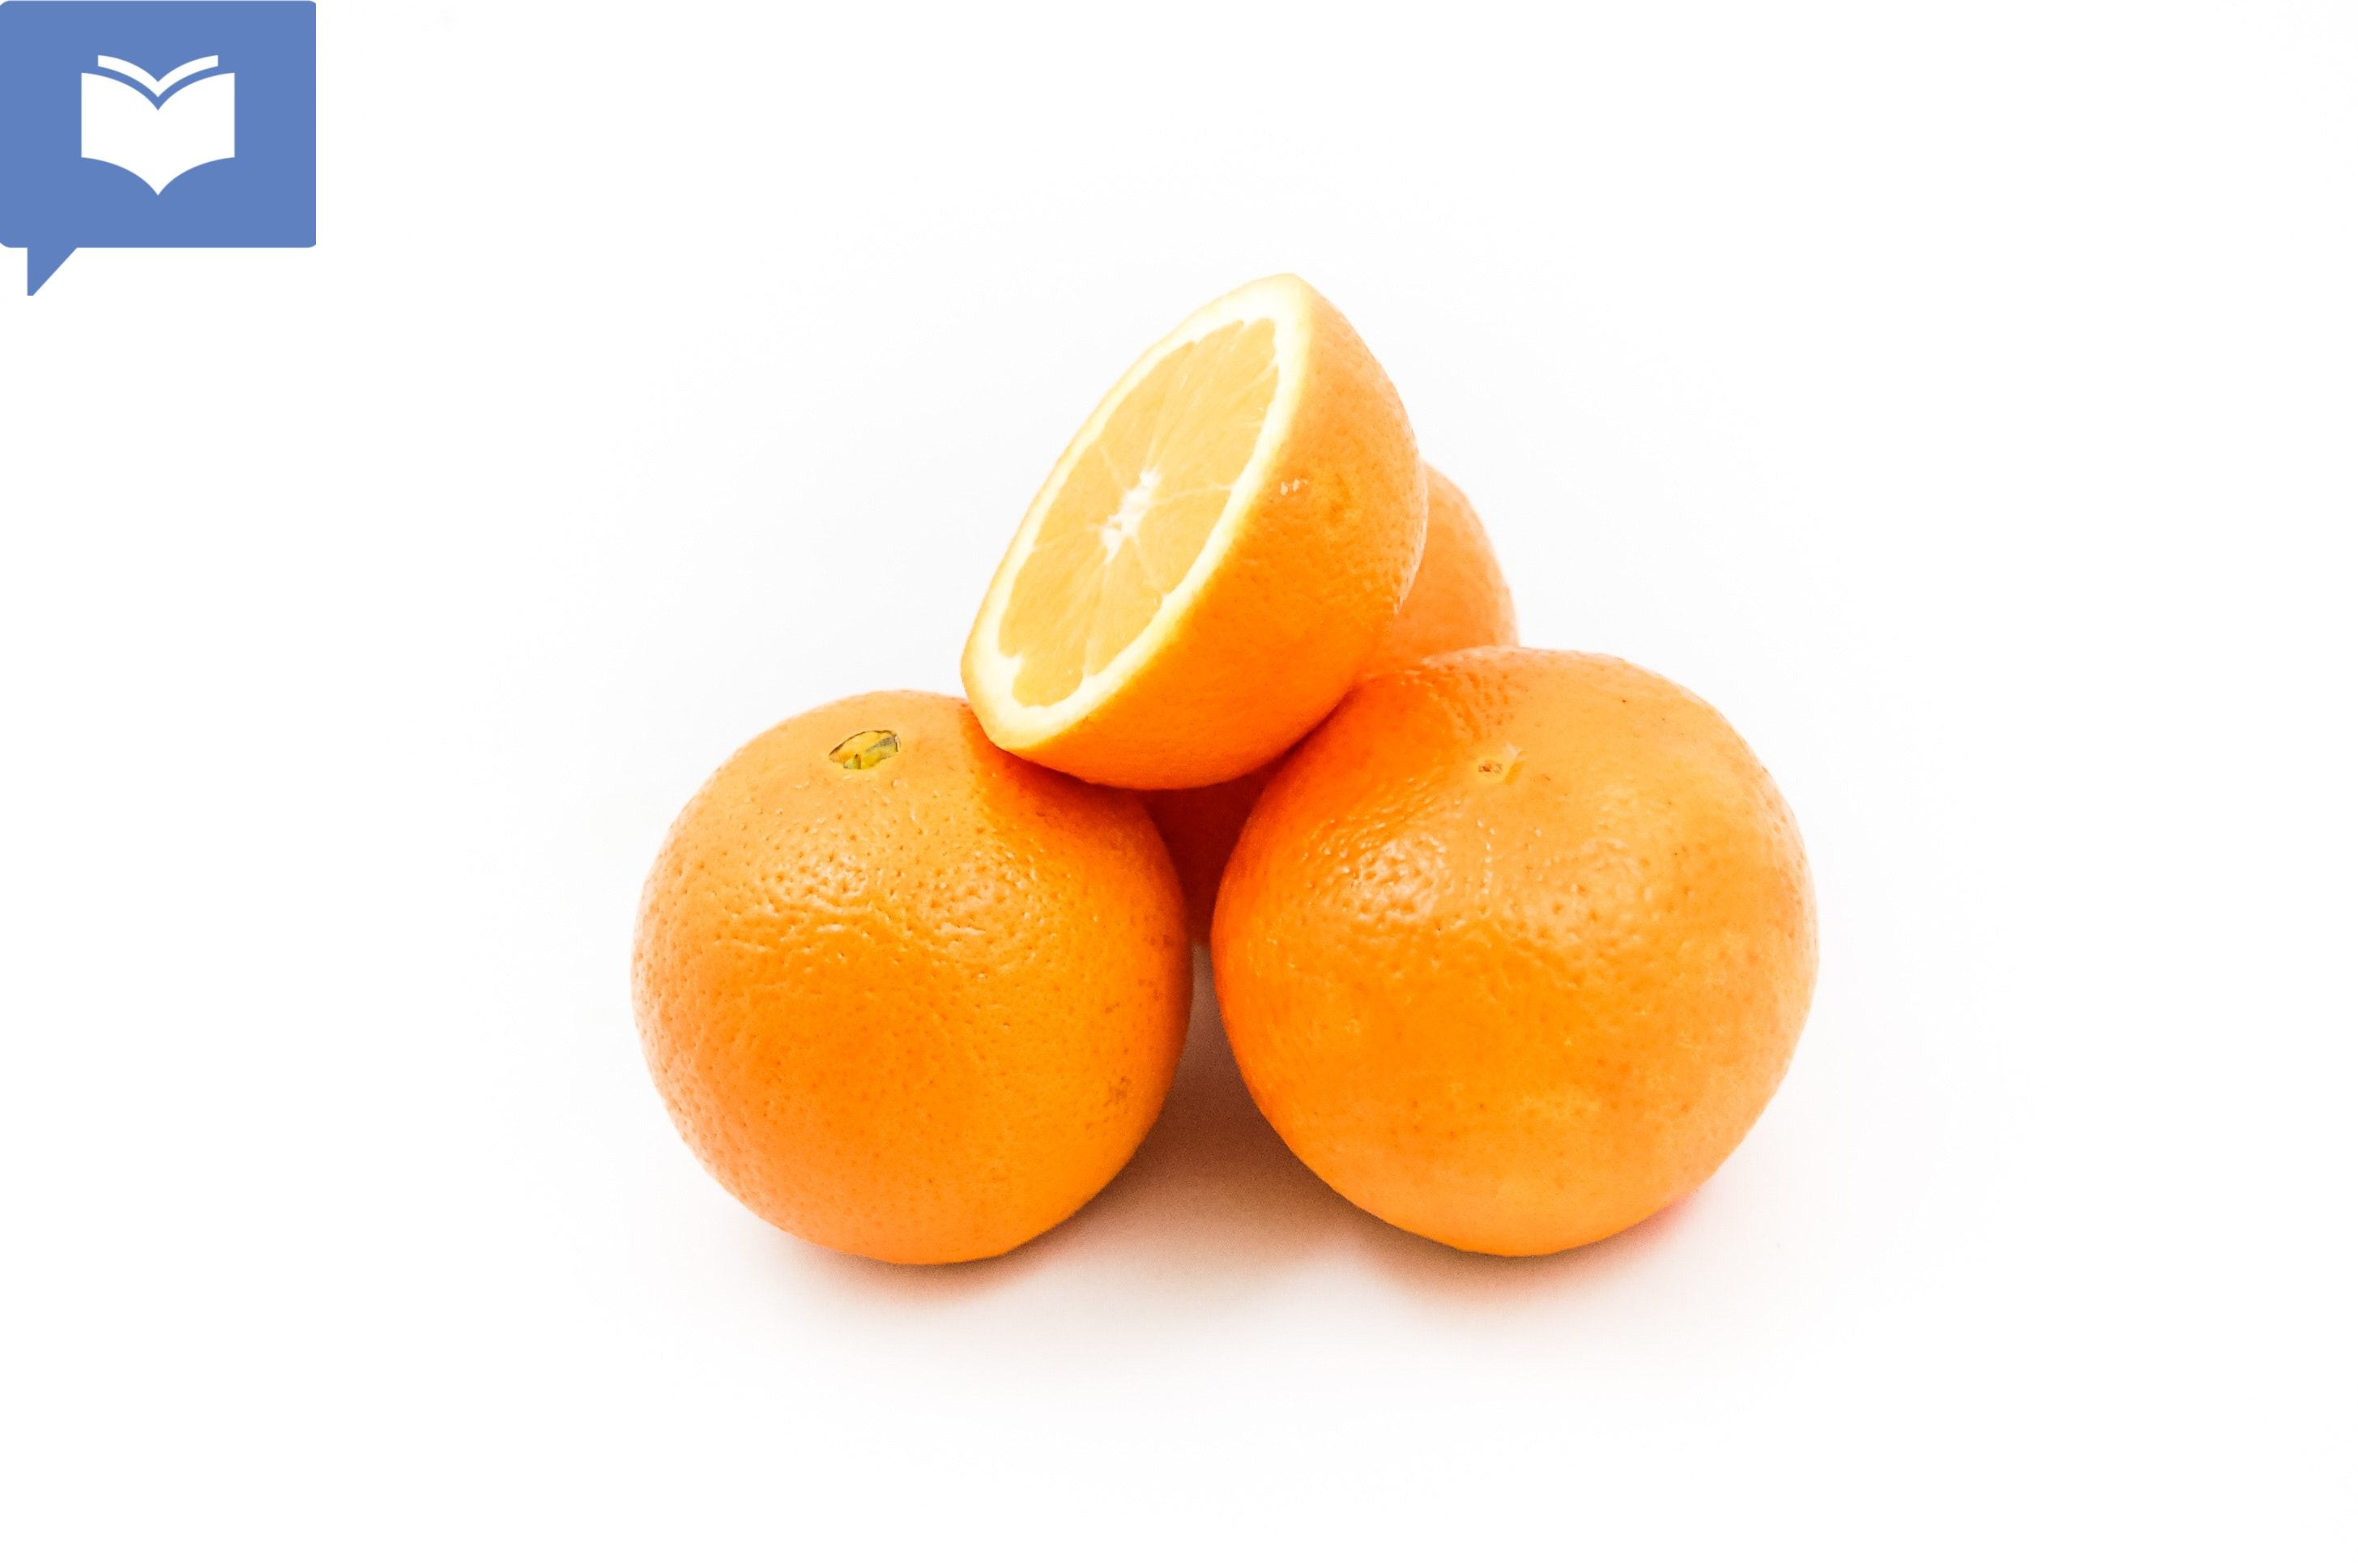 <p>Which color do these oranges have?</p>